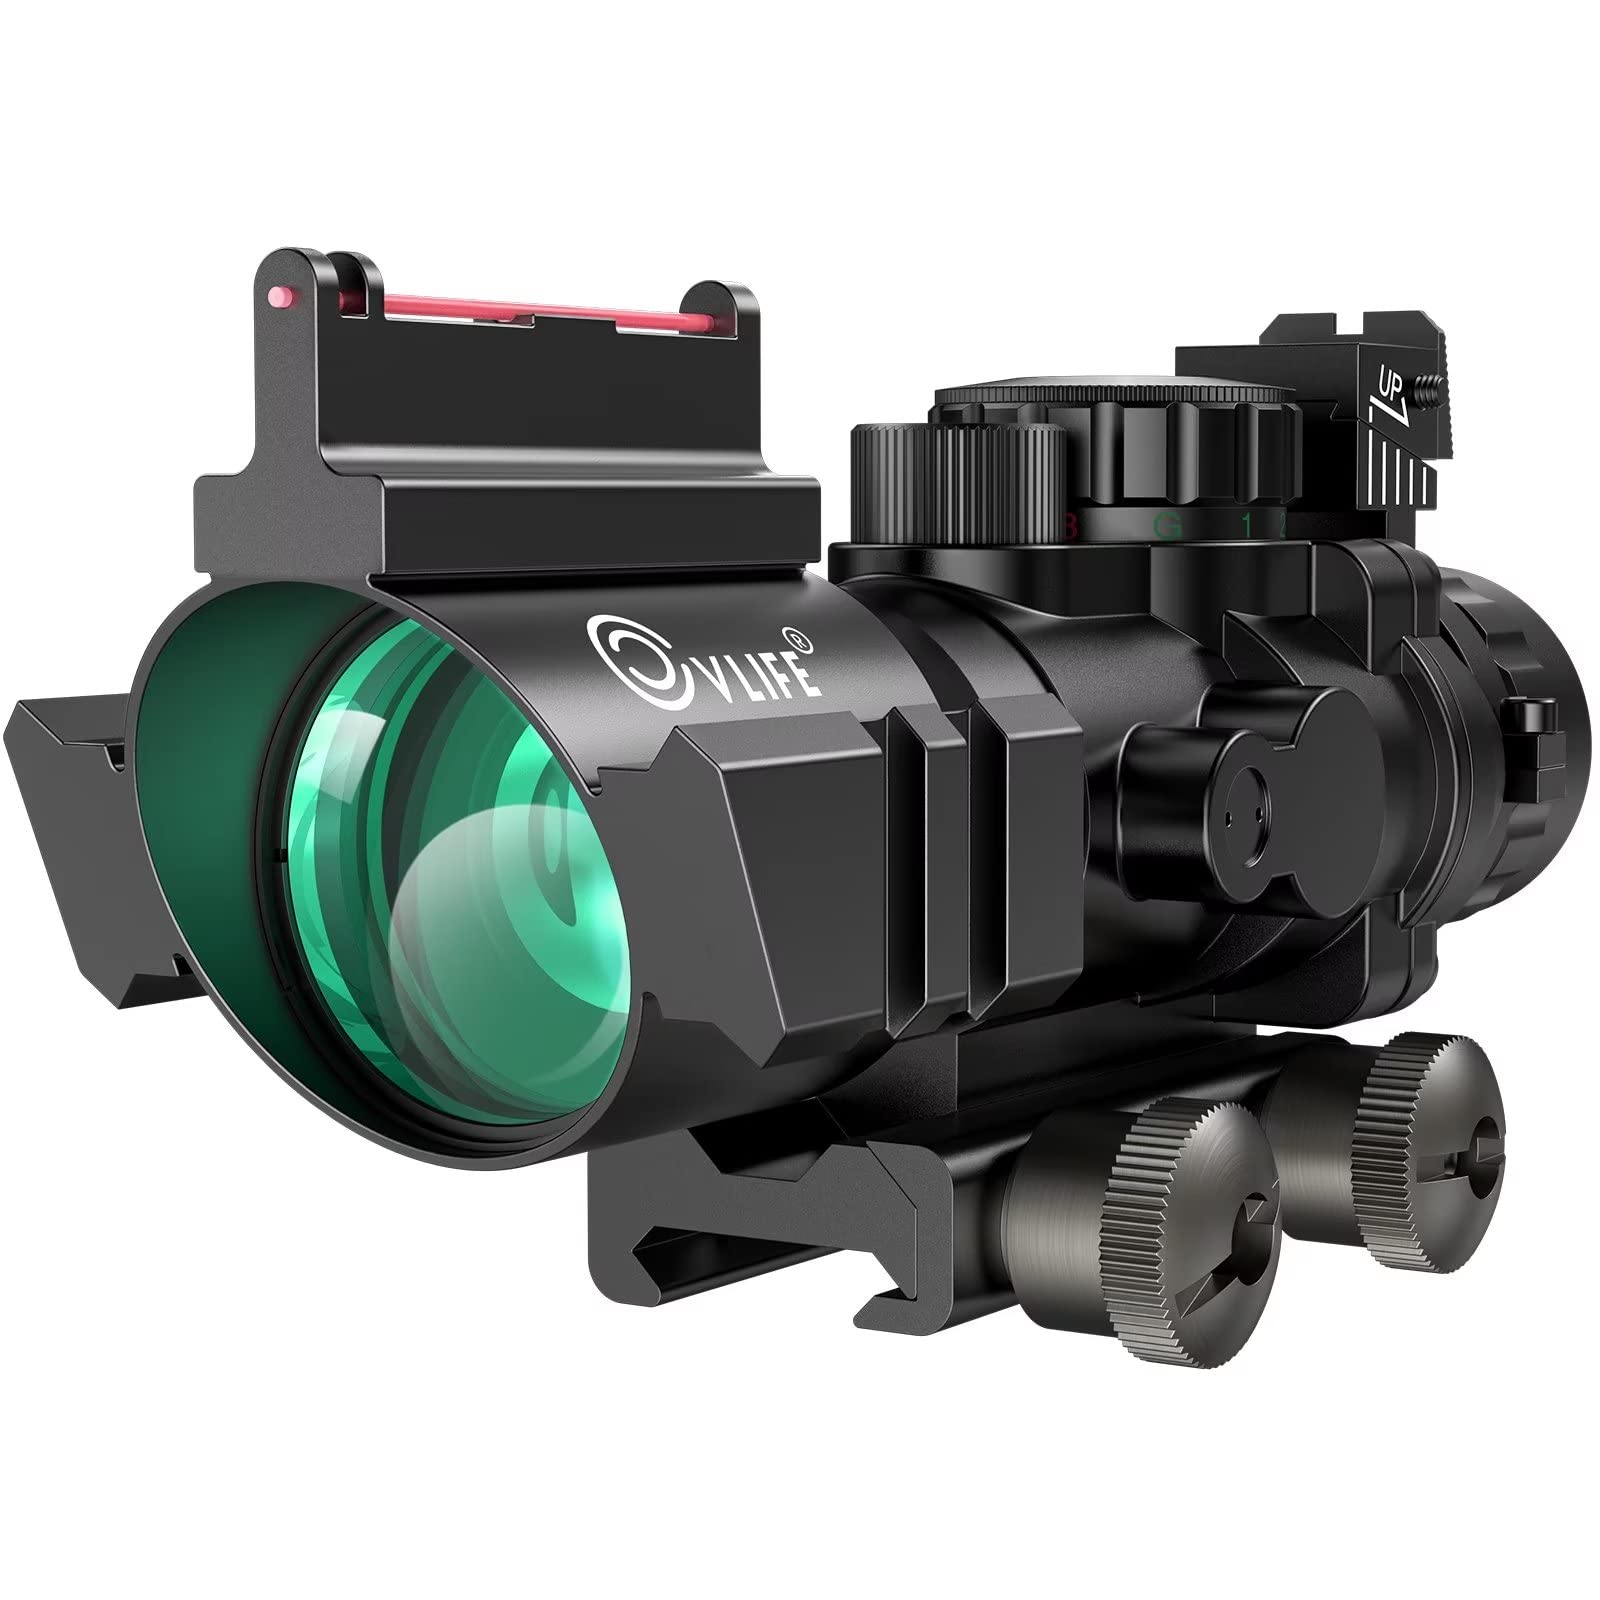 CVLIFE 4x32 Tactical Rifle Scope Red & Green &Blue Illuminated Reticle Scope with Fiber Optic Sight